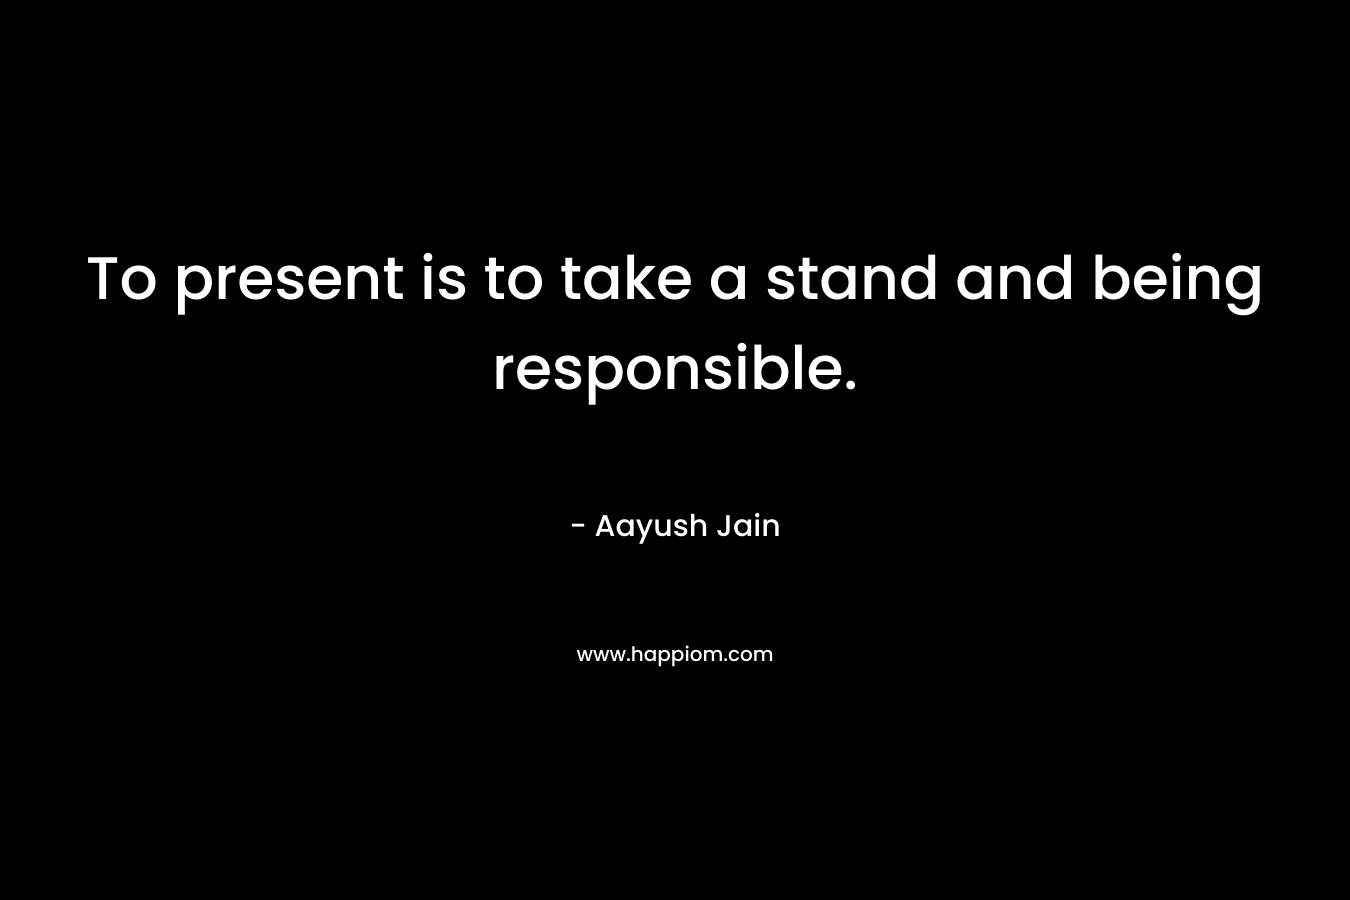 To present is to take a stand and being responsible.